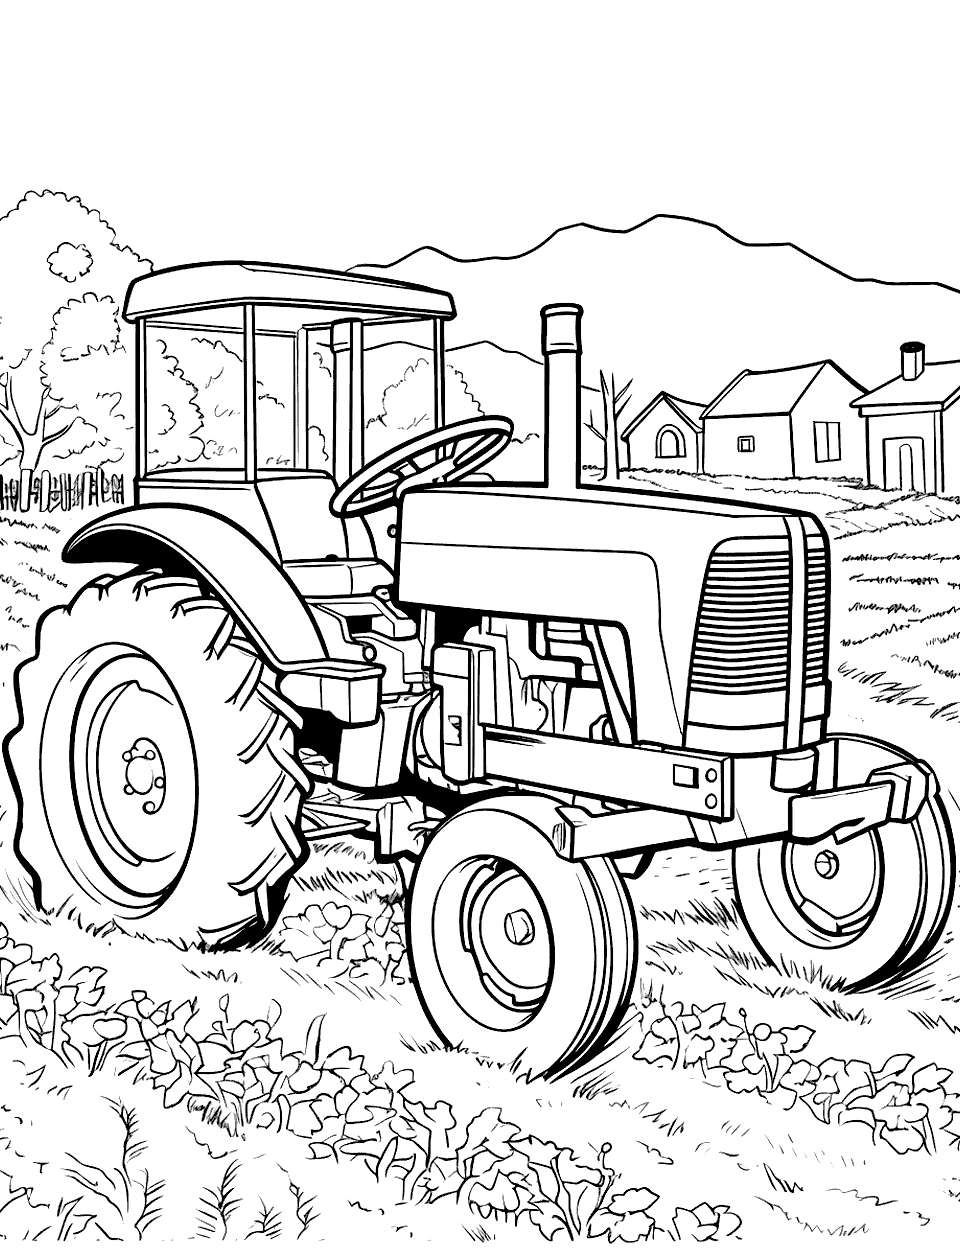 Tractor in the Vegetable Garden Coloring Page - A tractor tilling a small vegetable garden.